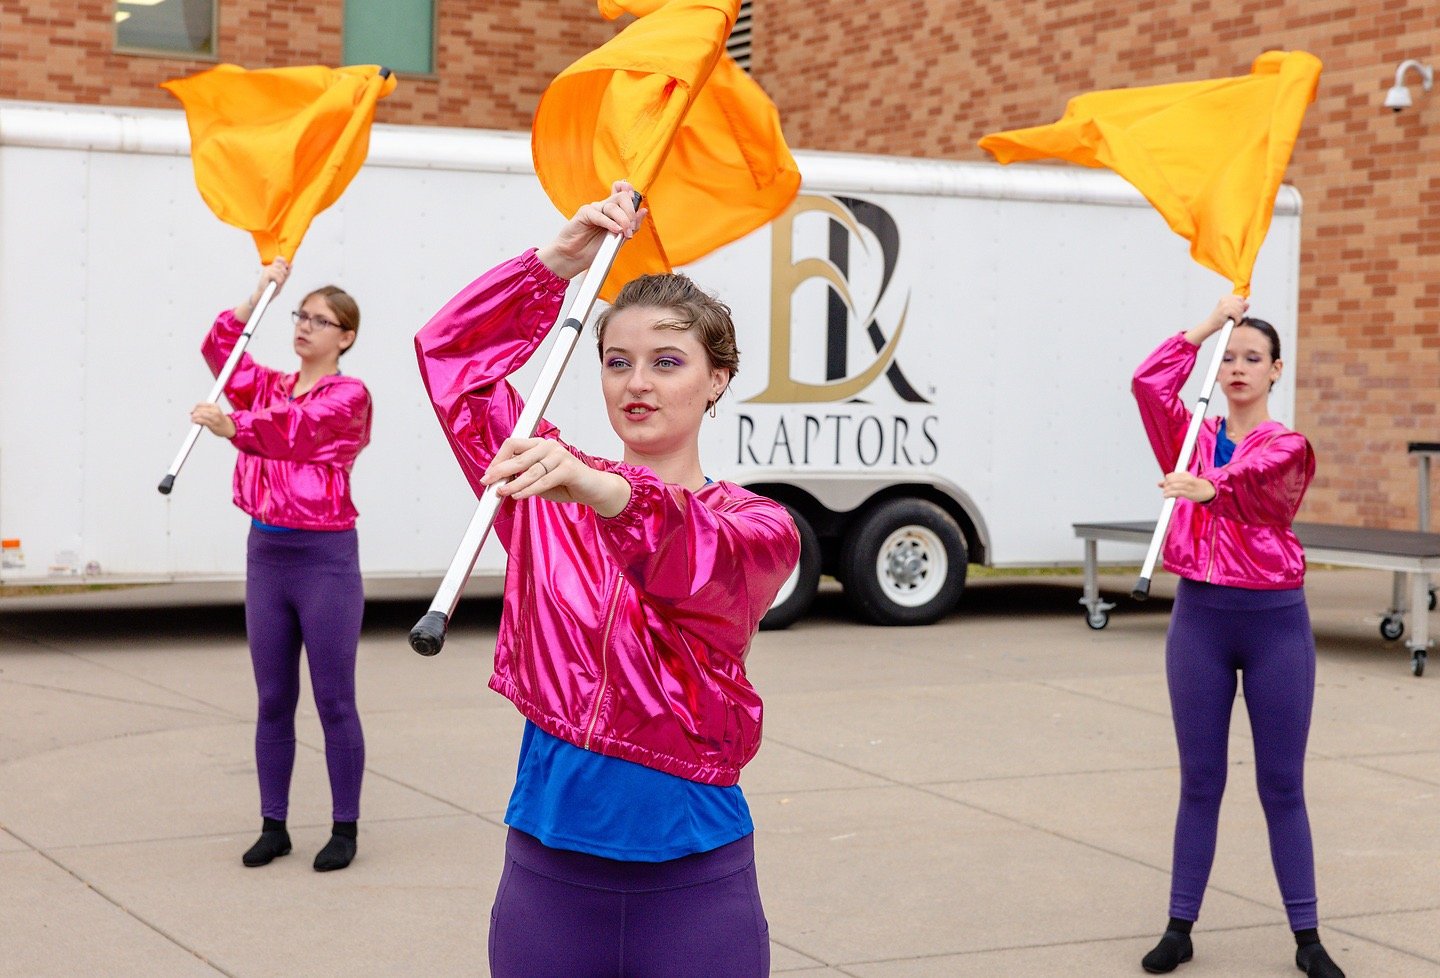 Join the fun! We are gearing up for Marching  Band season and would love to recruit more students for color guard. 
Guard members do not have to be in the music program to participate and no previous experience is necessary. #colorguard